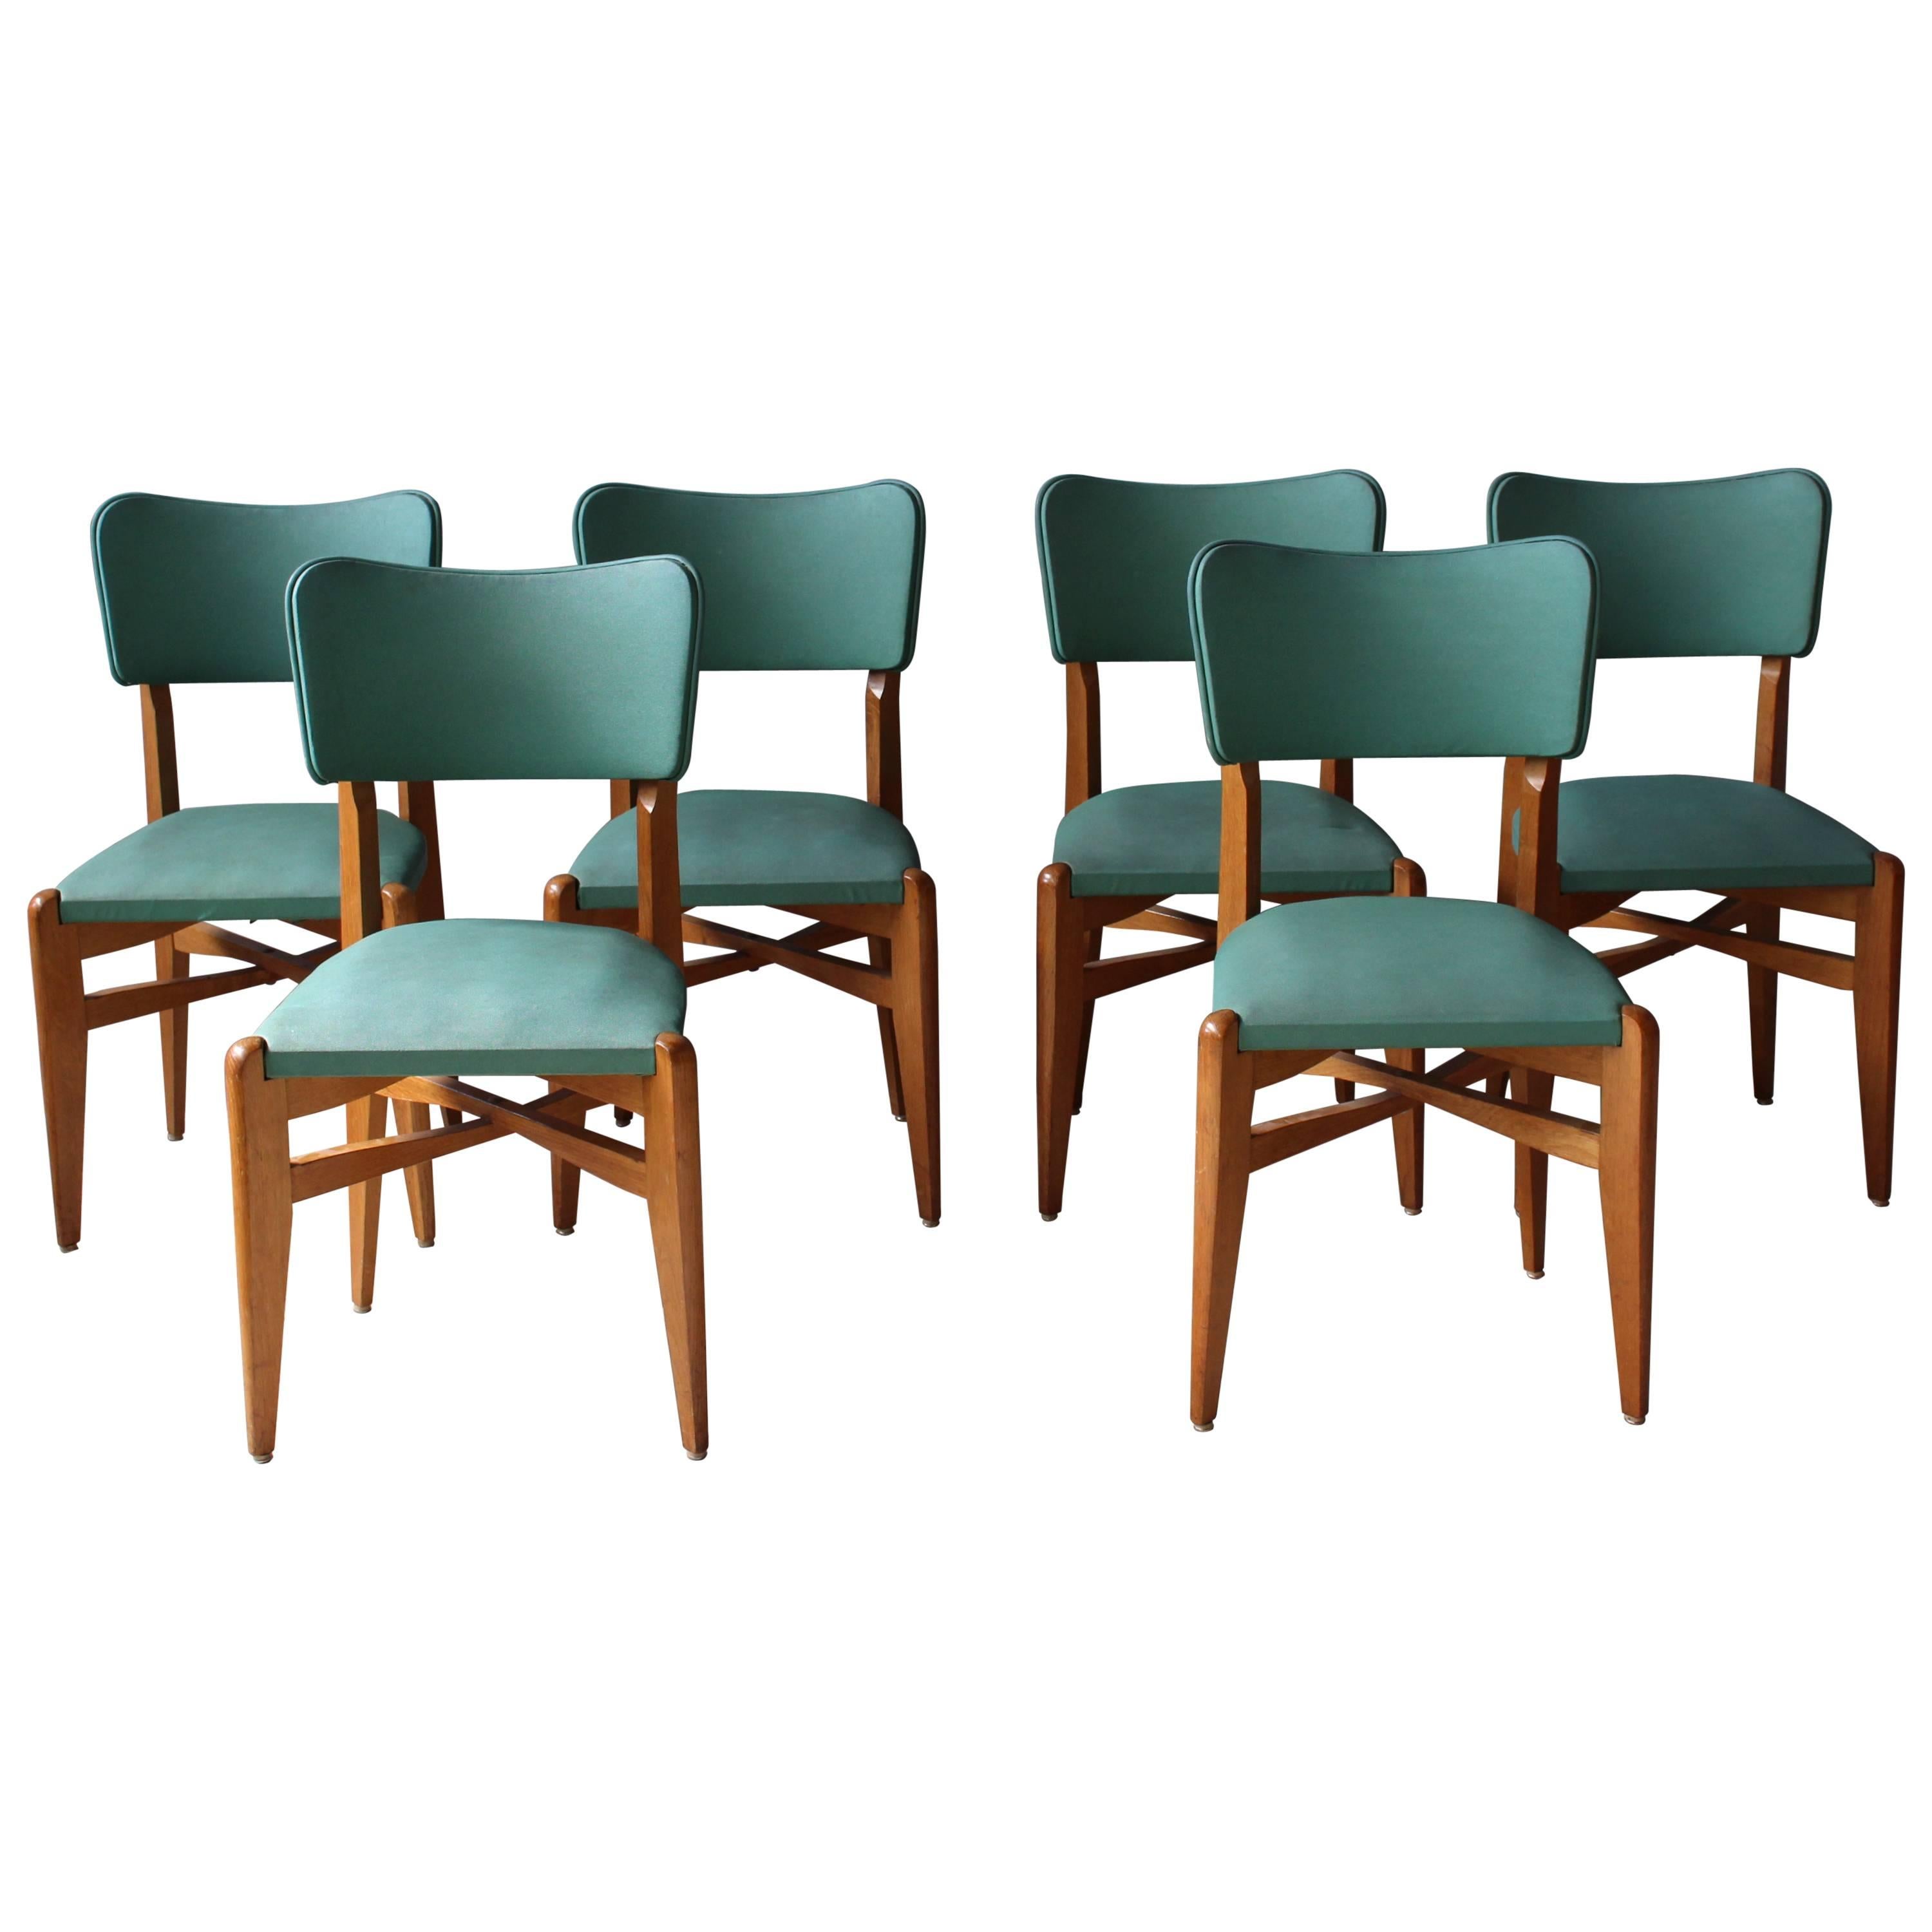 A set of 6 French 1950's Oak Chairs